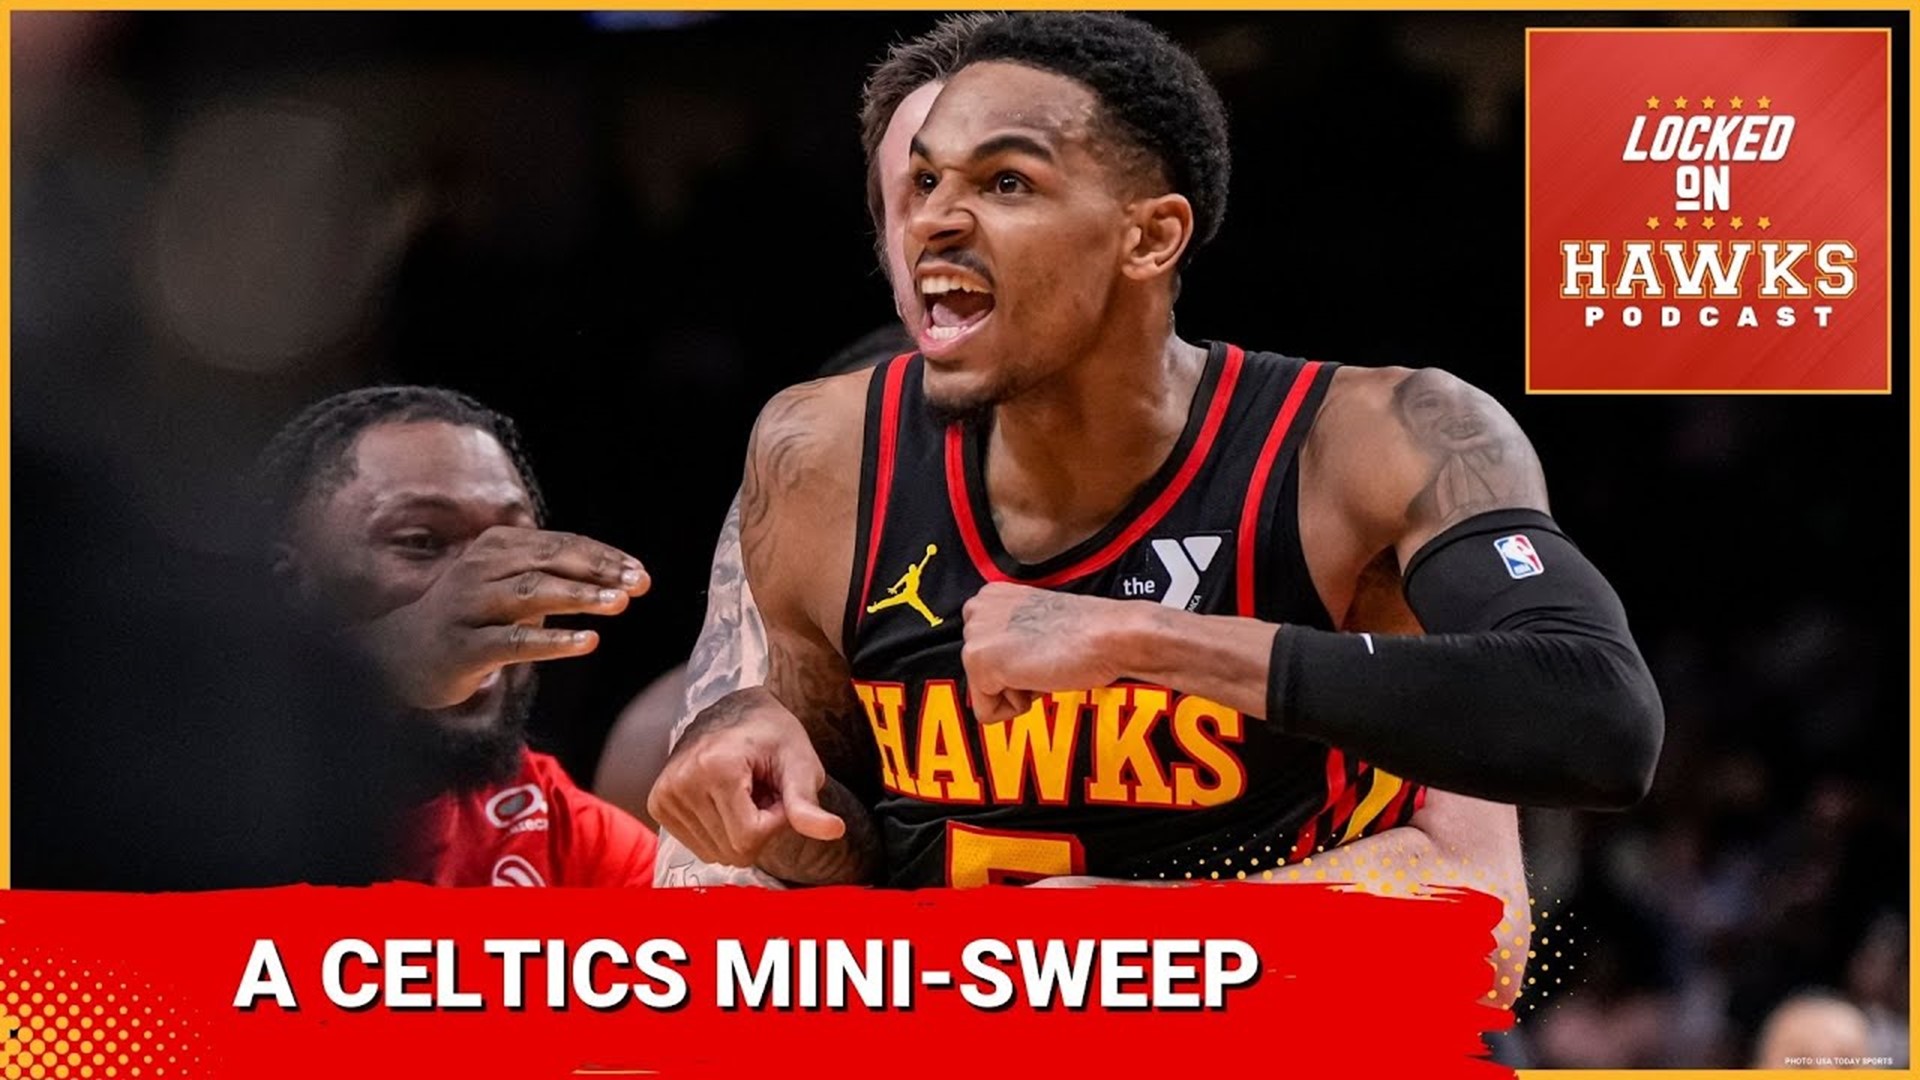 The show breaks down Thursday’s game between the Atlanta Hawks and the Boston Celtics, including Dejounte Murray's monster night